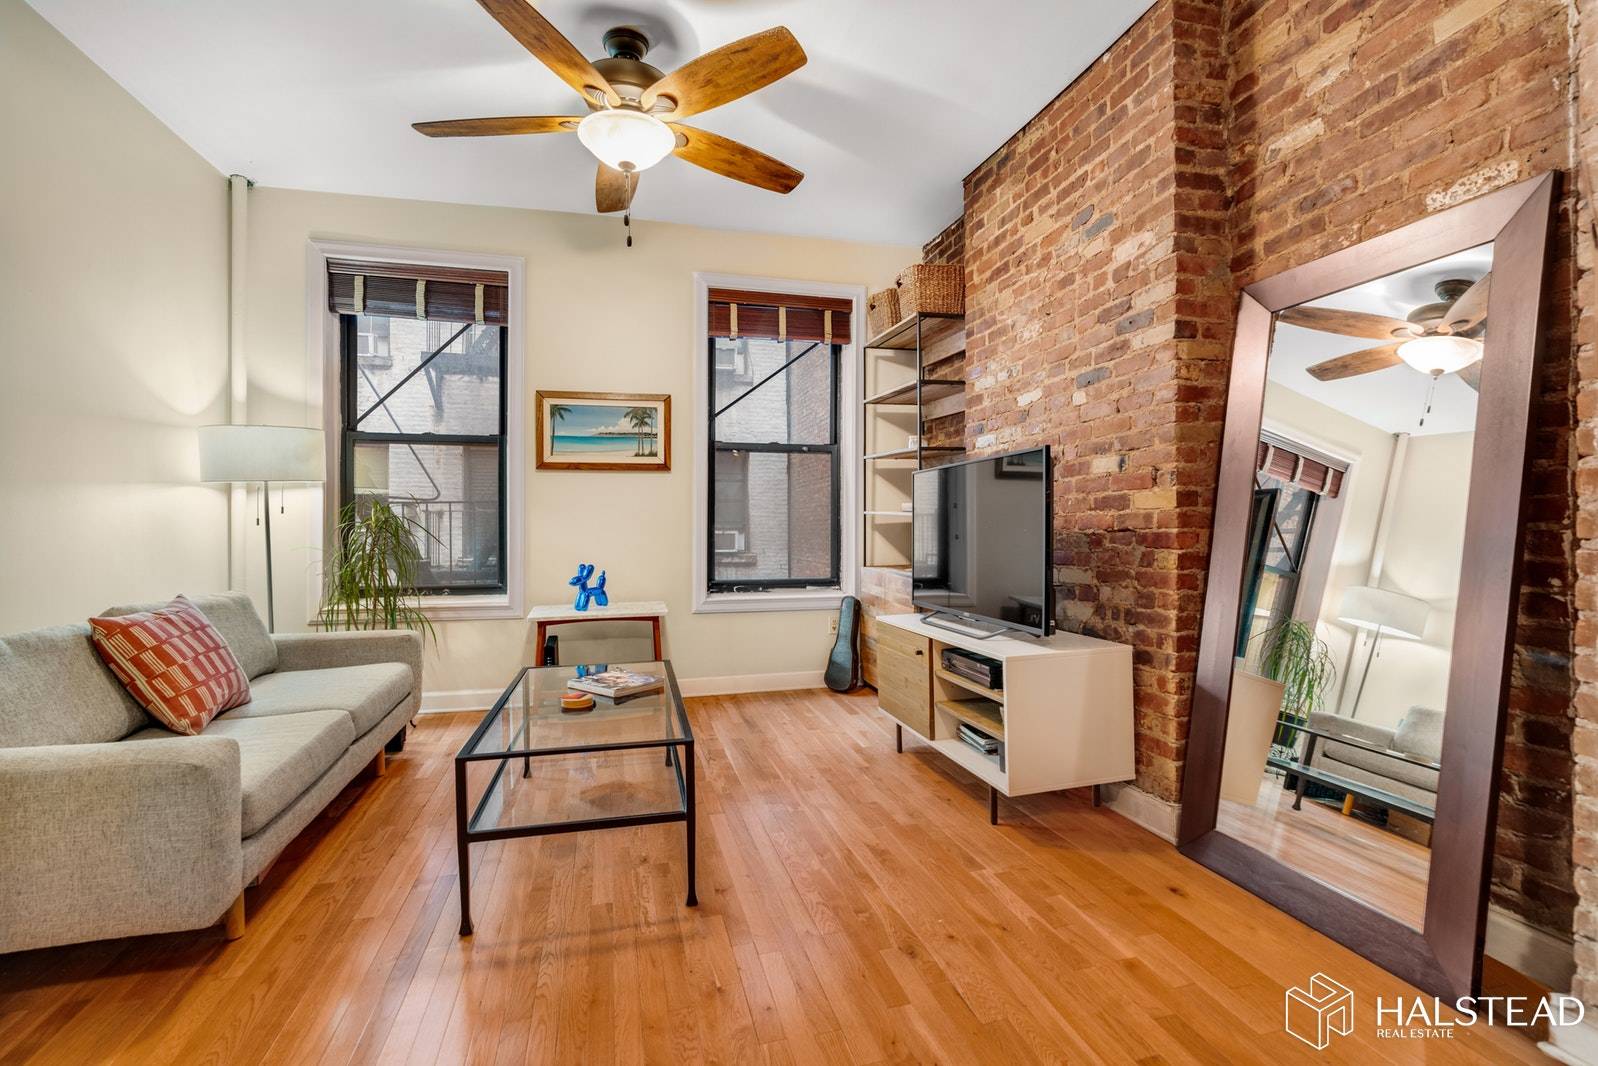 This home offers the charm and serenity you have been looking for in the heart of Hell's Kitchen.